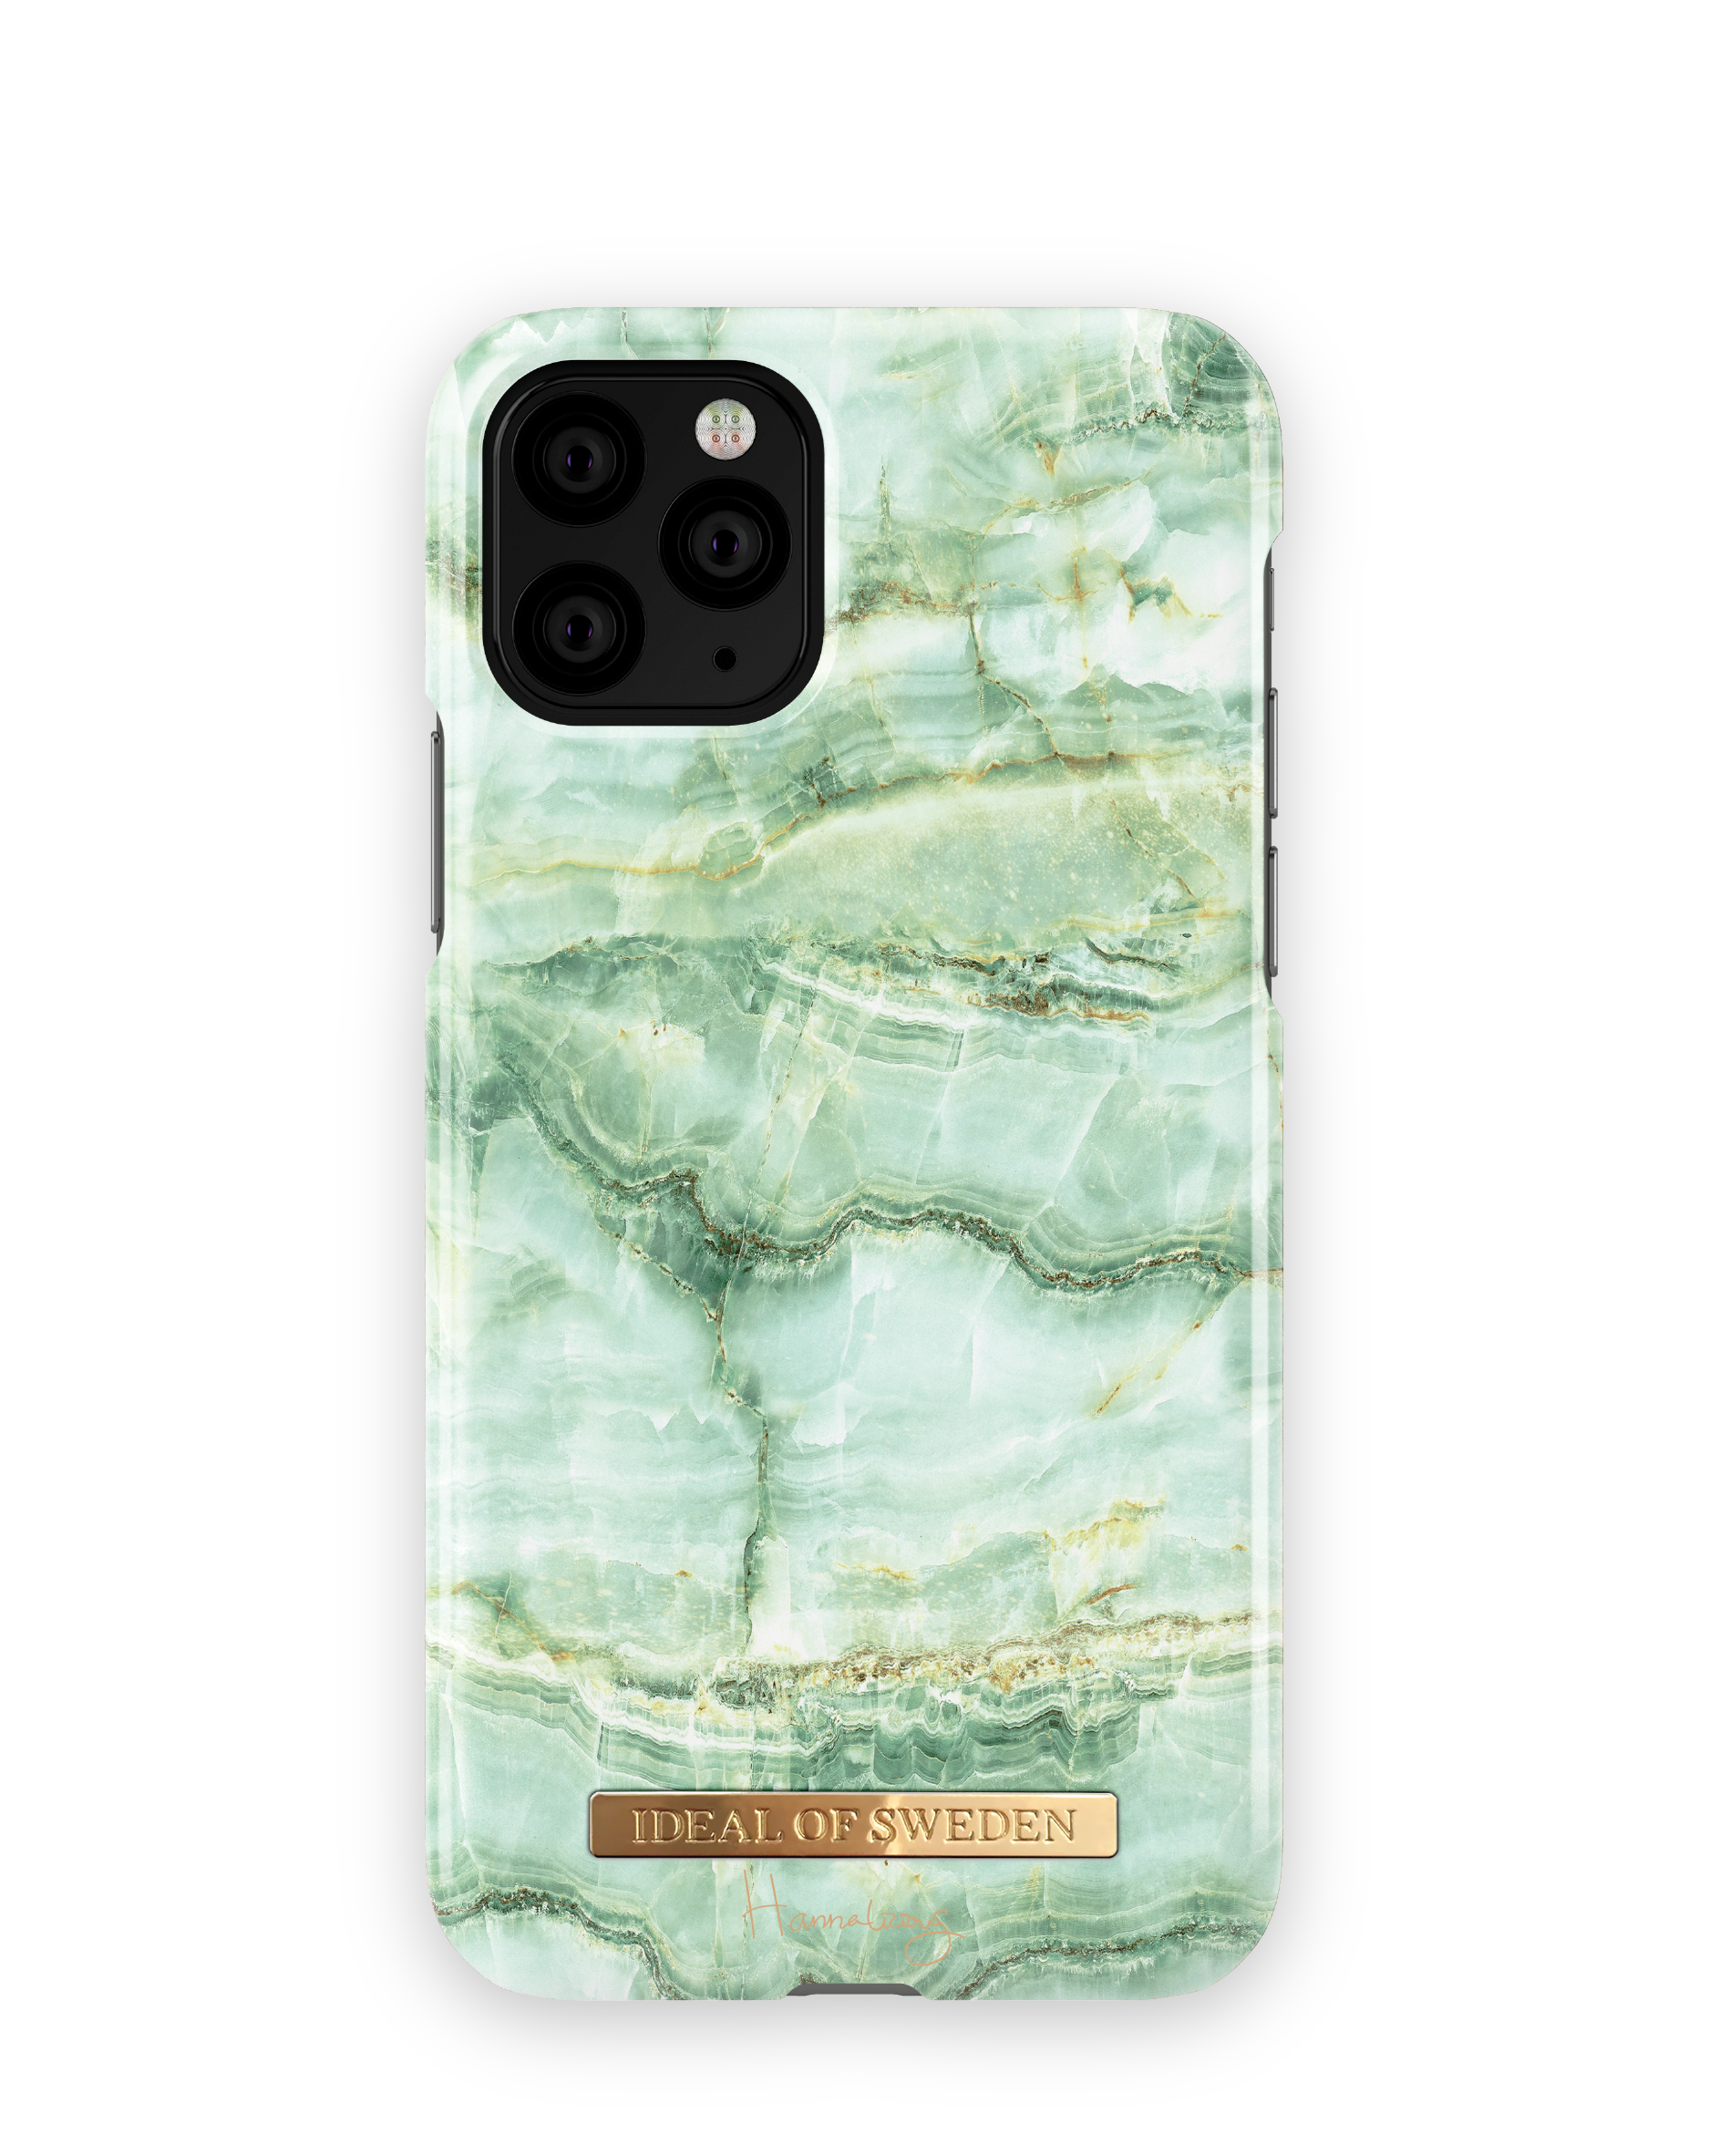 11 X, Pro, Mojito Apple XS, Backcover, iPhone OF Marble IDFCH2-I1958-125, Apple IDEAL Apple, iPhone iPhone Apple SWEDEN